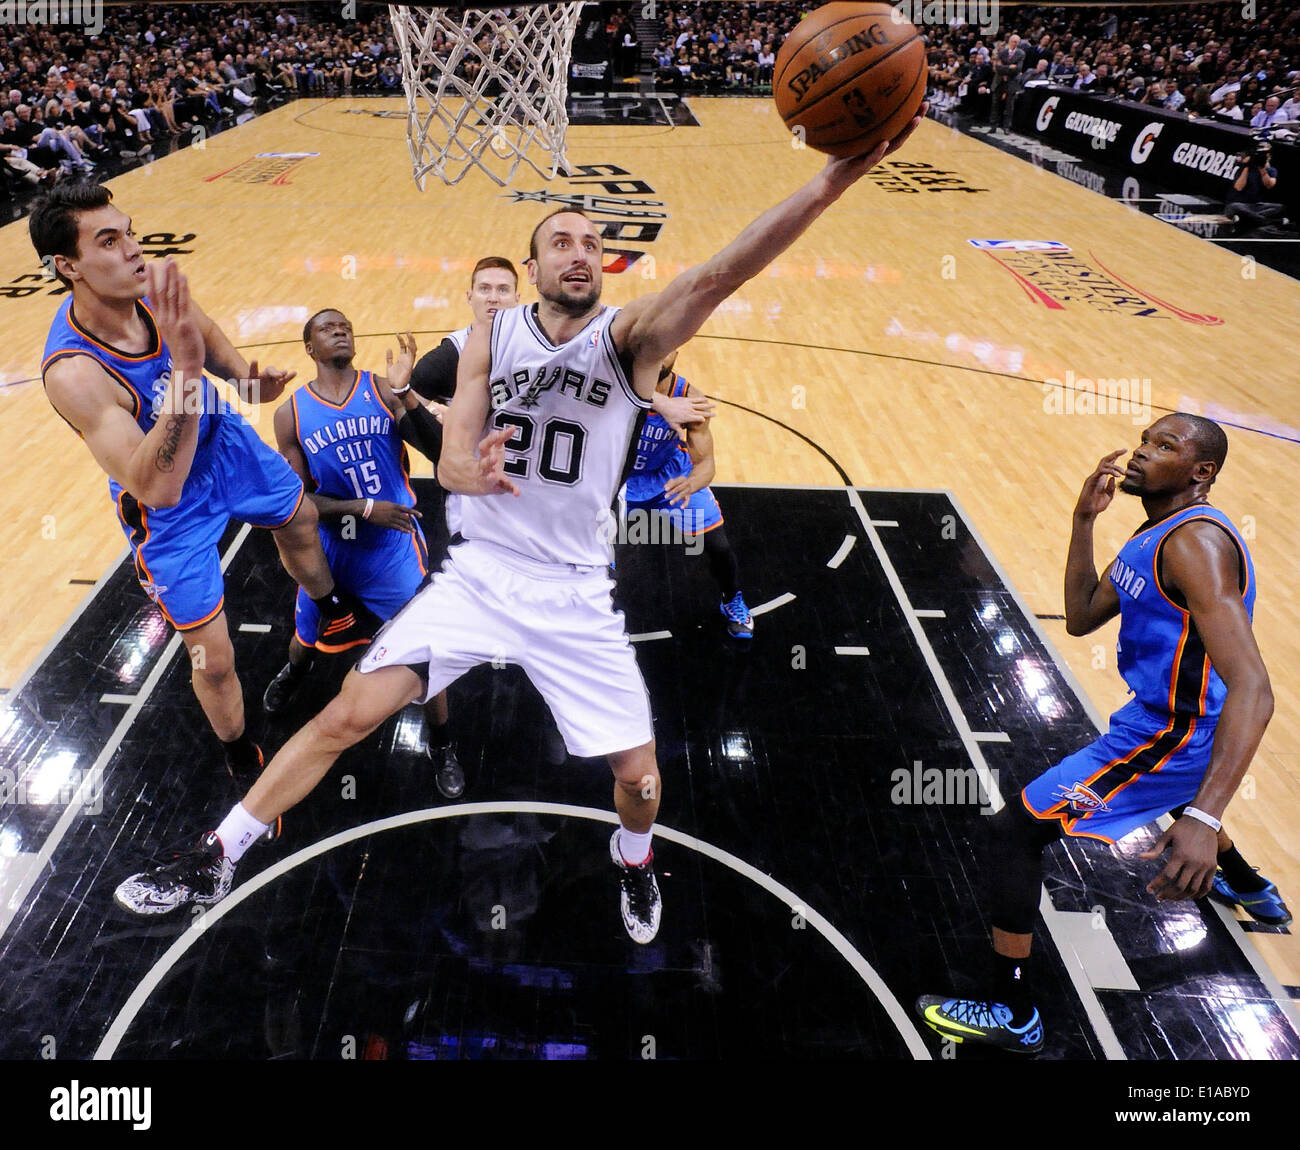 May 19, 2014 - San Antonio, TEXAS, USA - San Antonio Spurs' Manu Ginobili shoots between Oklahoma City Thunder's Steven Adams (left) and Kevin Durant during second half action of Game 1 in the Western Conference Finals Monday May 19, 2014 at the AT&T Center. The Spurs won 122-105. (Credit Image: © San Antonio Express-News/ZUMAPRESS.com) Stock Photo